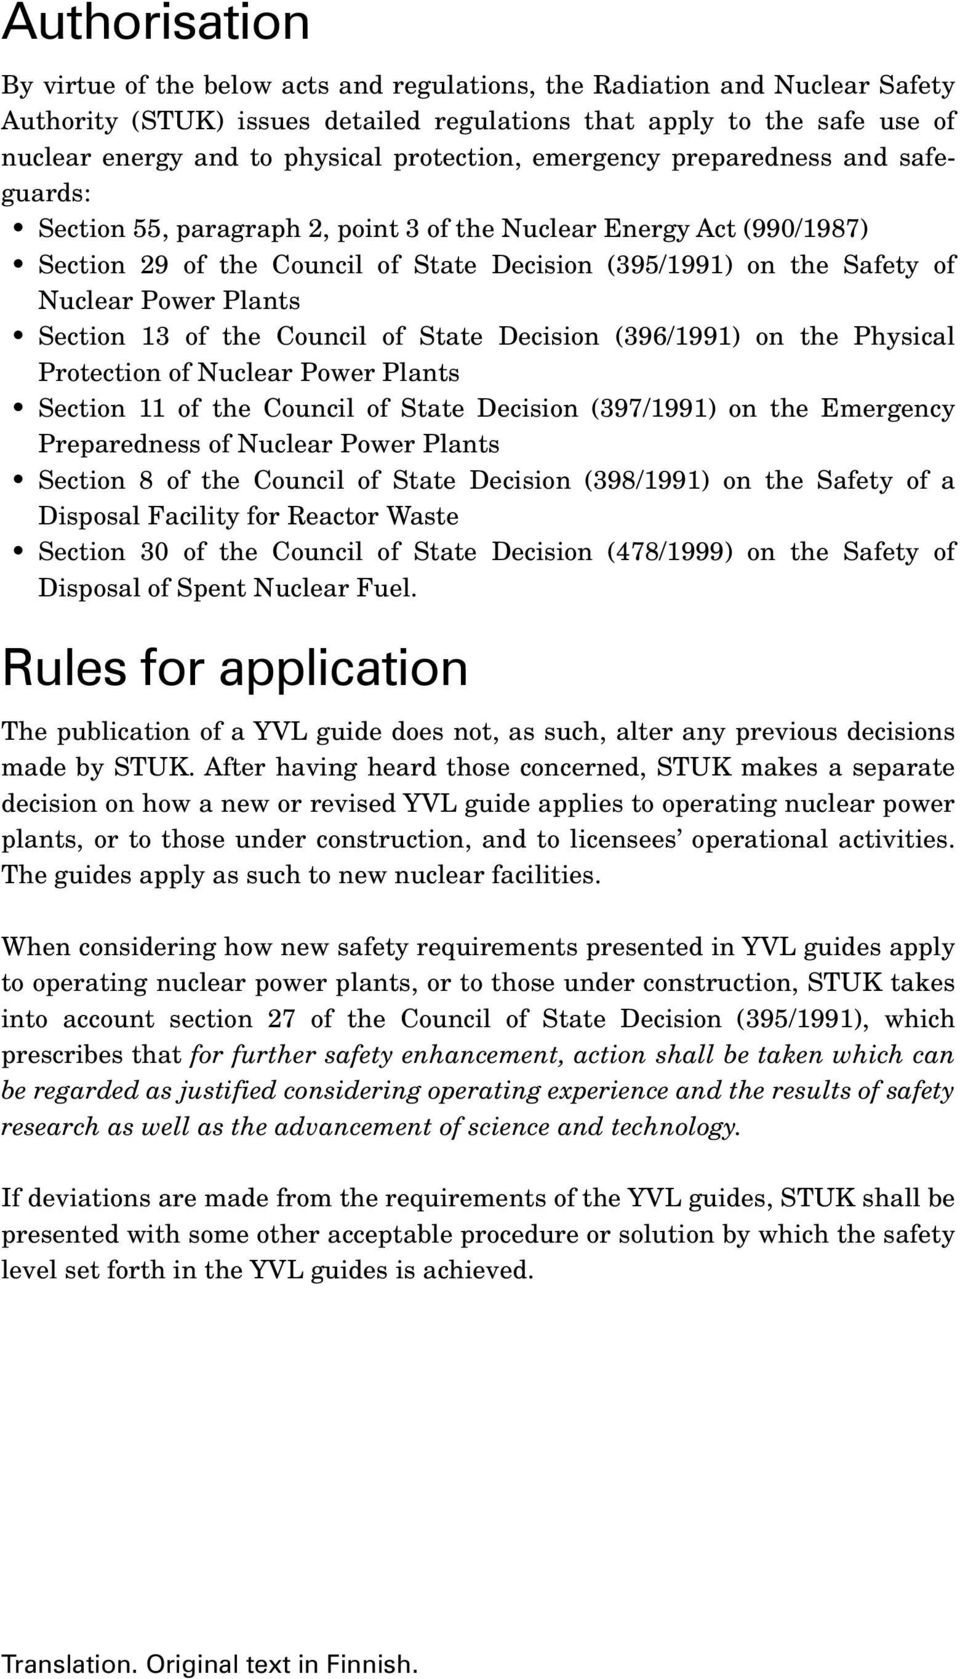 Nuclear Power Plants Section 13 of the Council of State Decision (396/1991) on the Physical Protection of Nuclear Power Plants Section 11 of the Council of State Decision (397/1991) on the Emergency